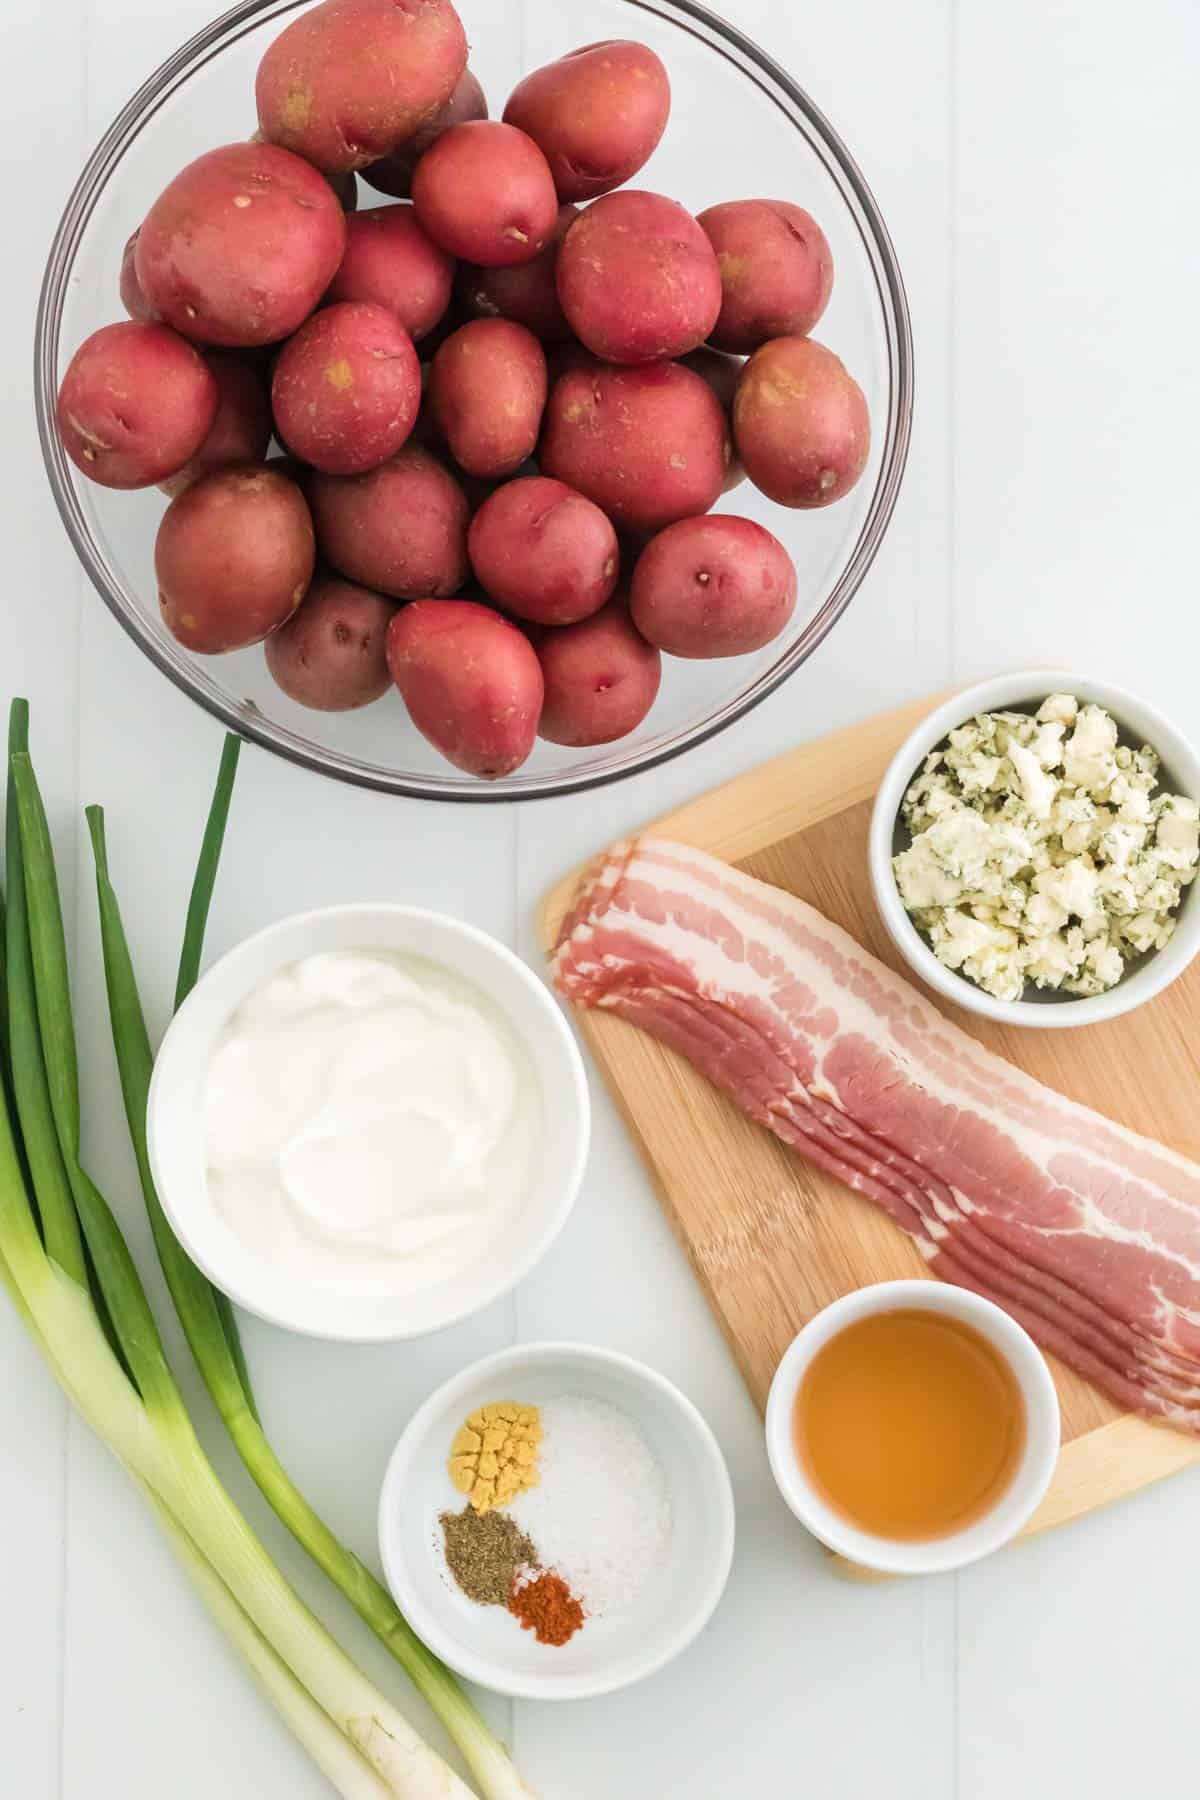 The ingredients for healthy blue cheese bacon potato salad.